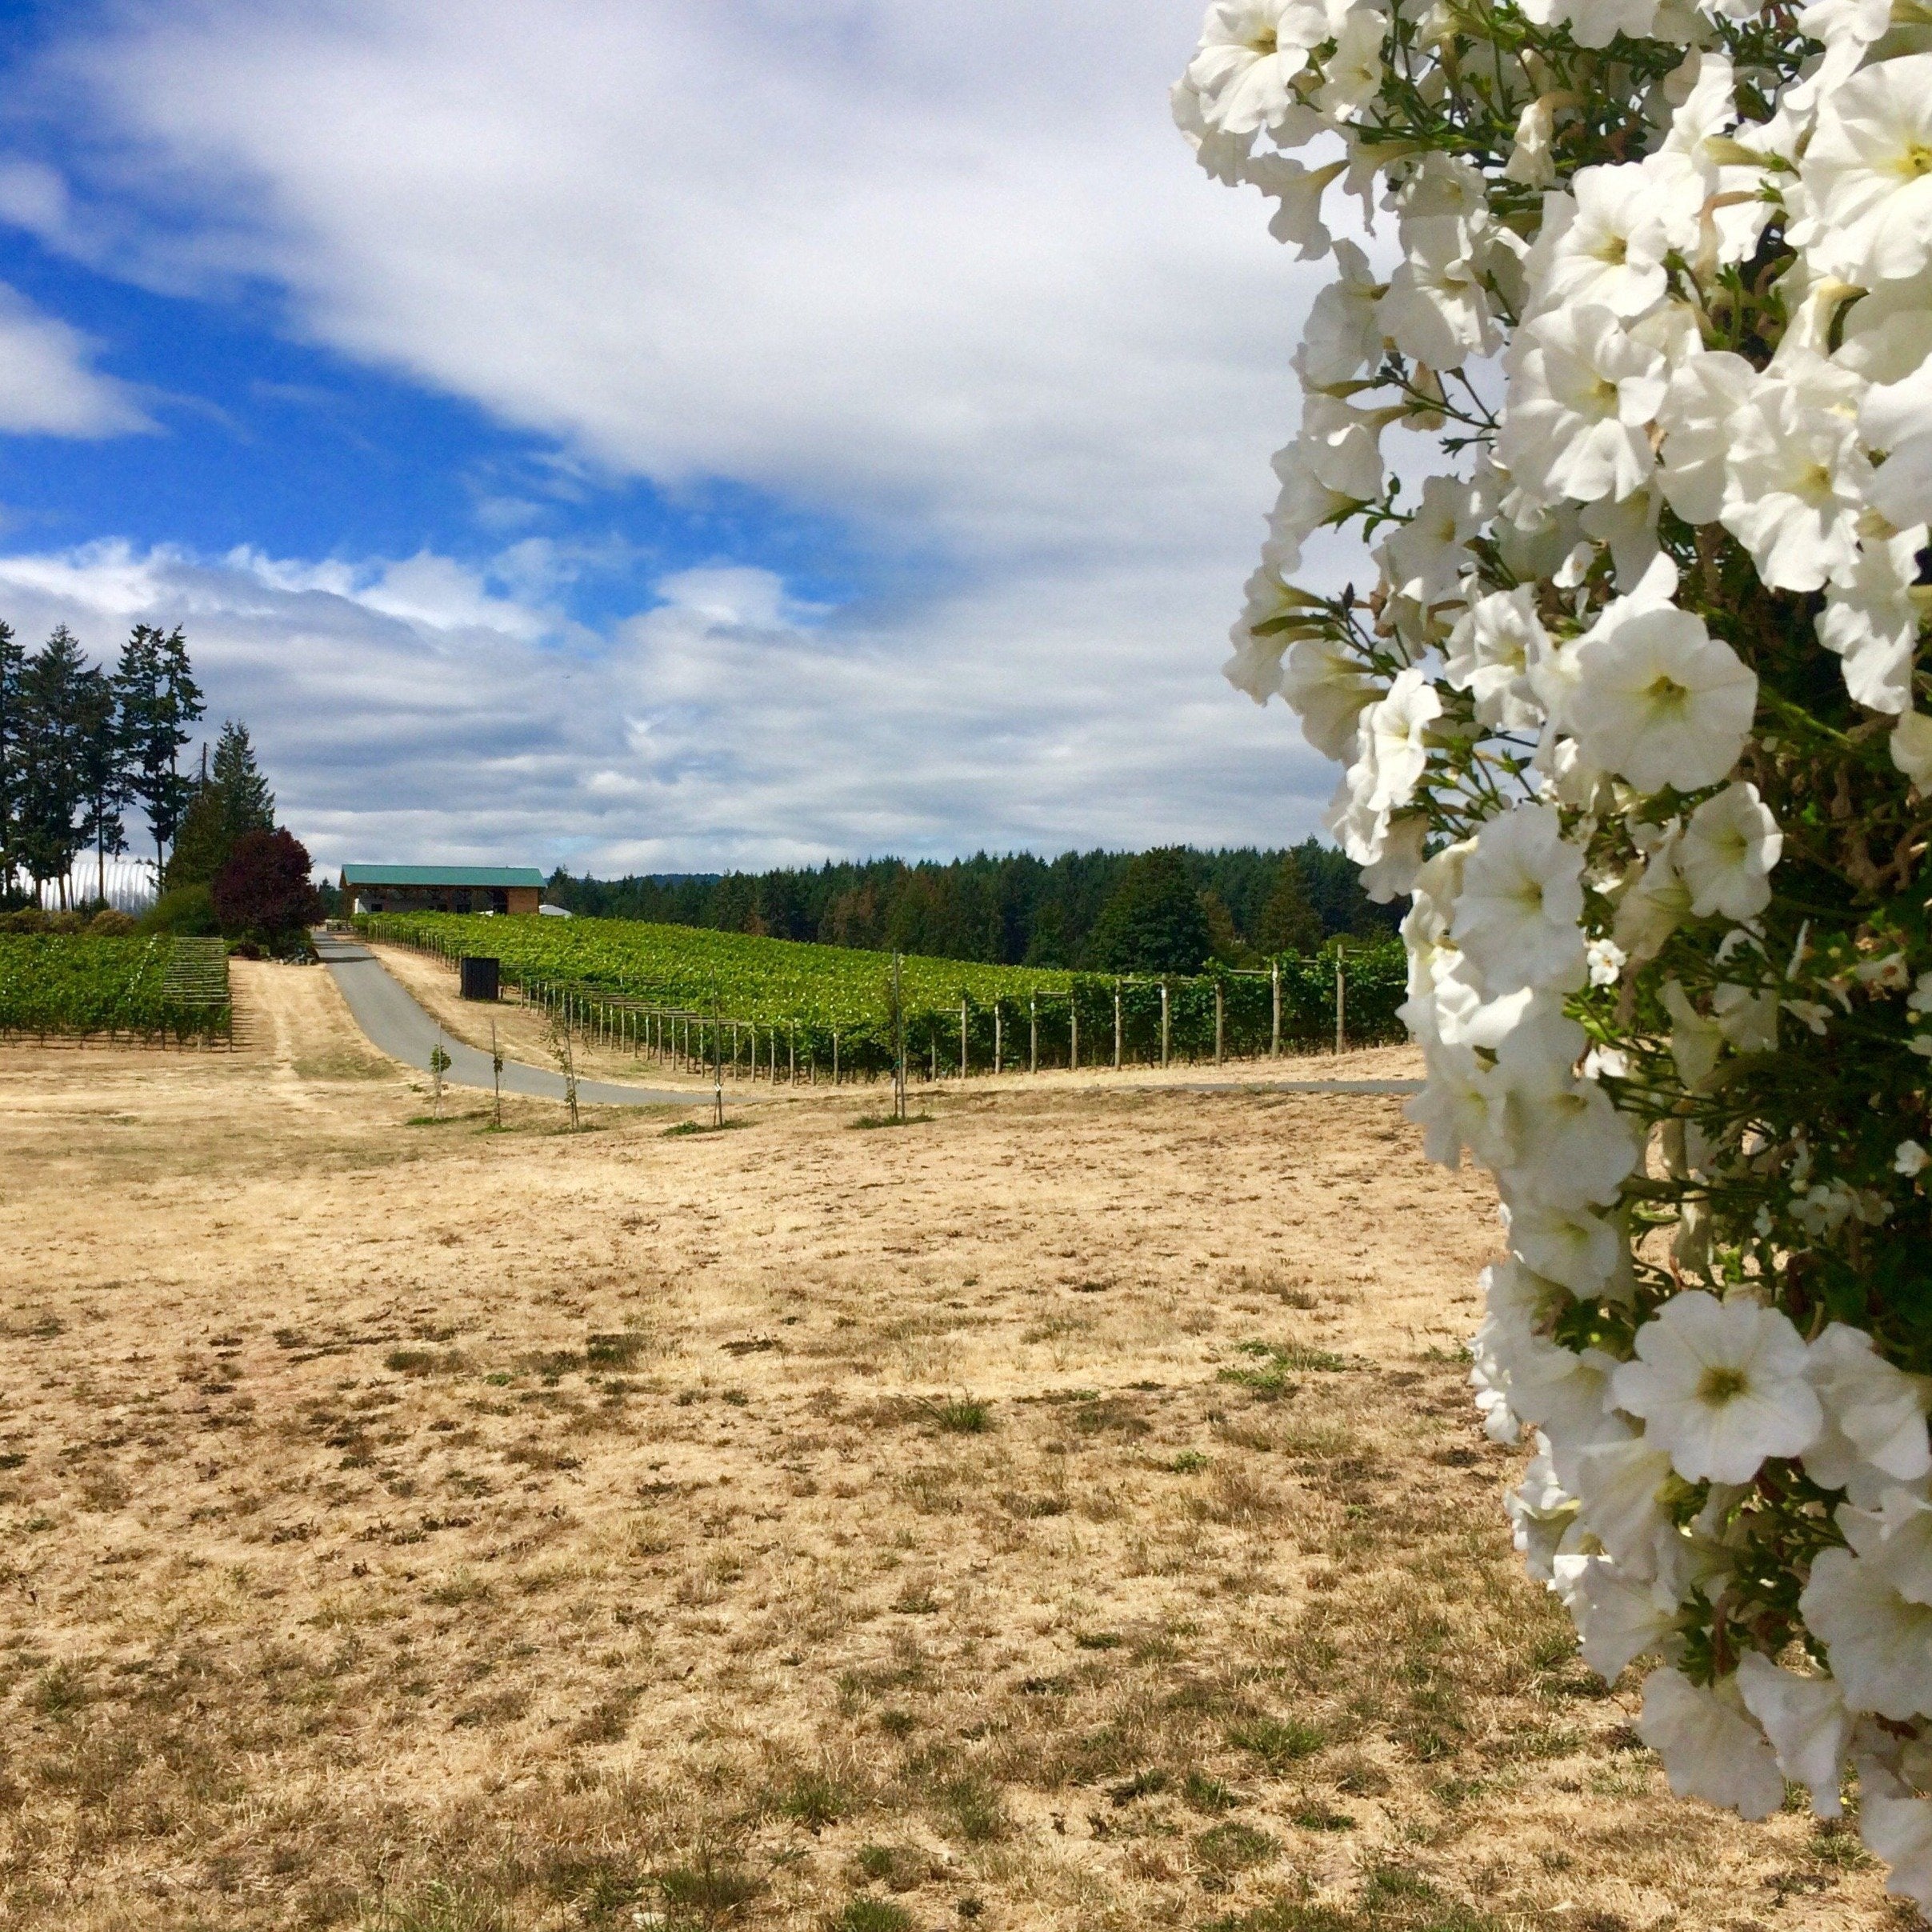 cowichan valley wine tour reviews